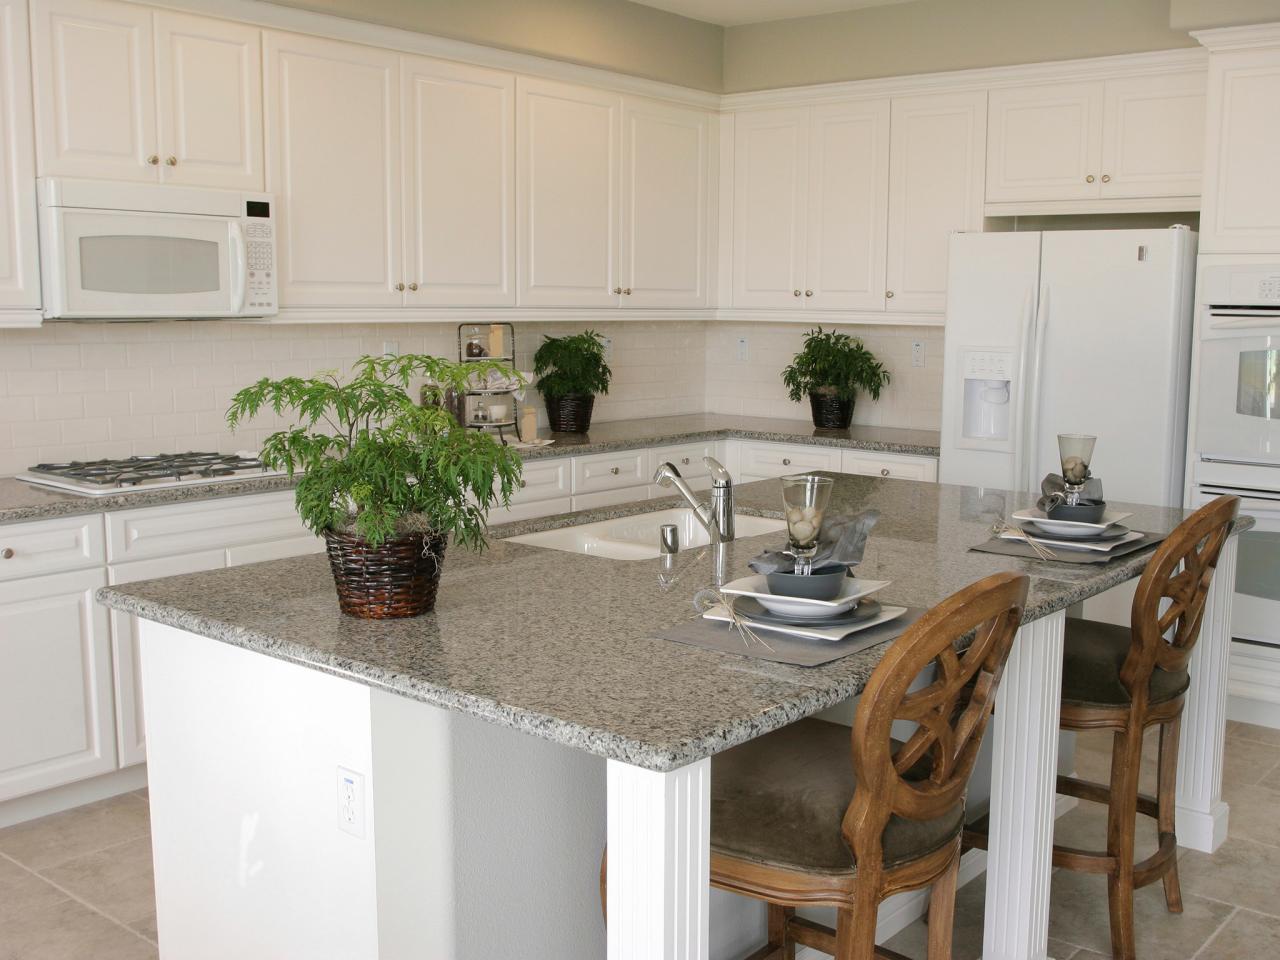 Neutral Granite Countertops, How To Choose The Right Color For Kitchen Countertops